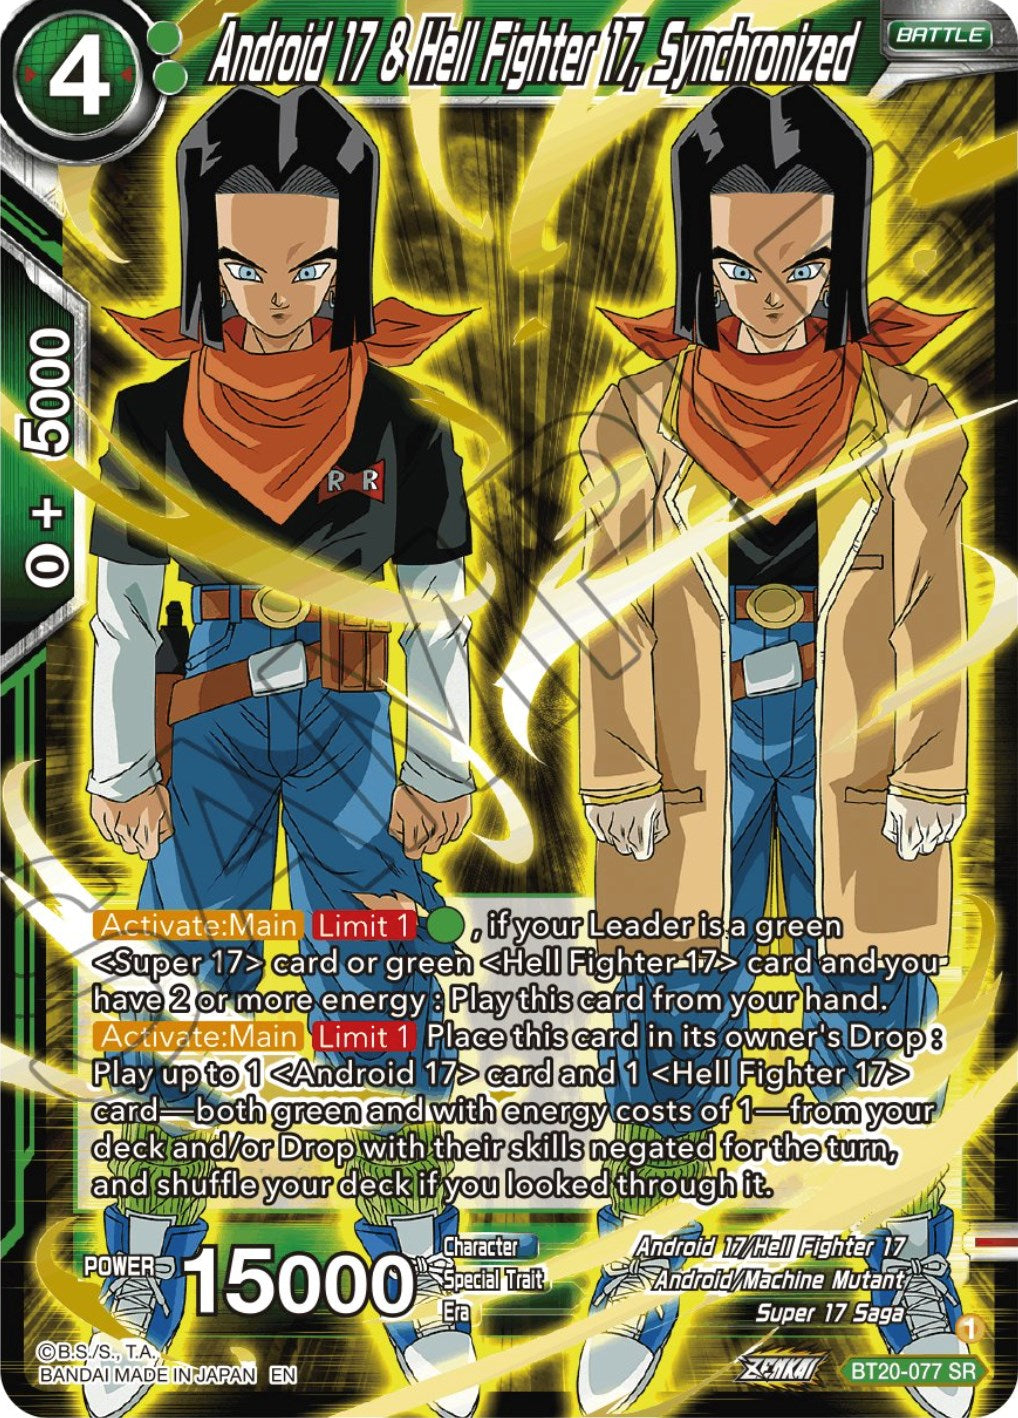 Android 17 & Hell Fighter 17, Synchronized (BT20-077) [Power Absorbed] | North Valley Games